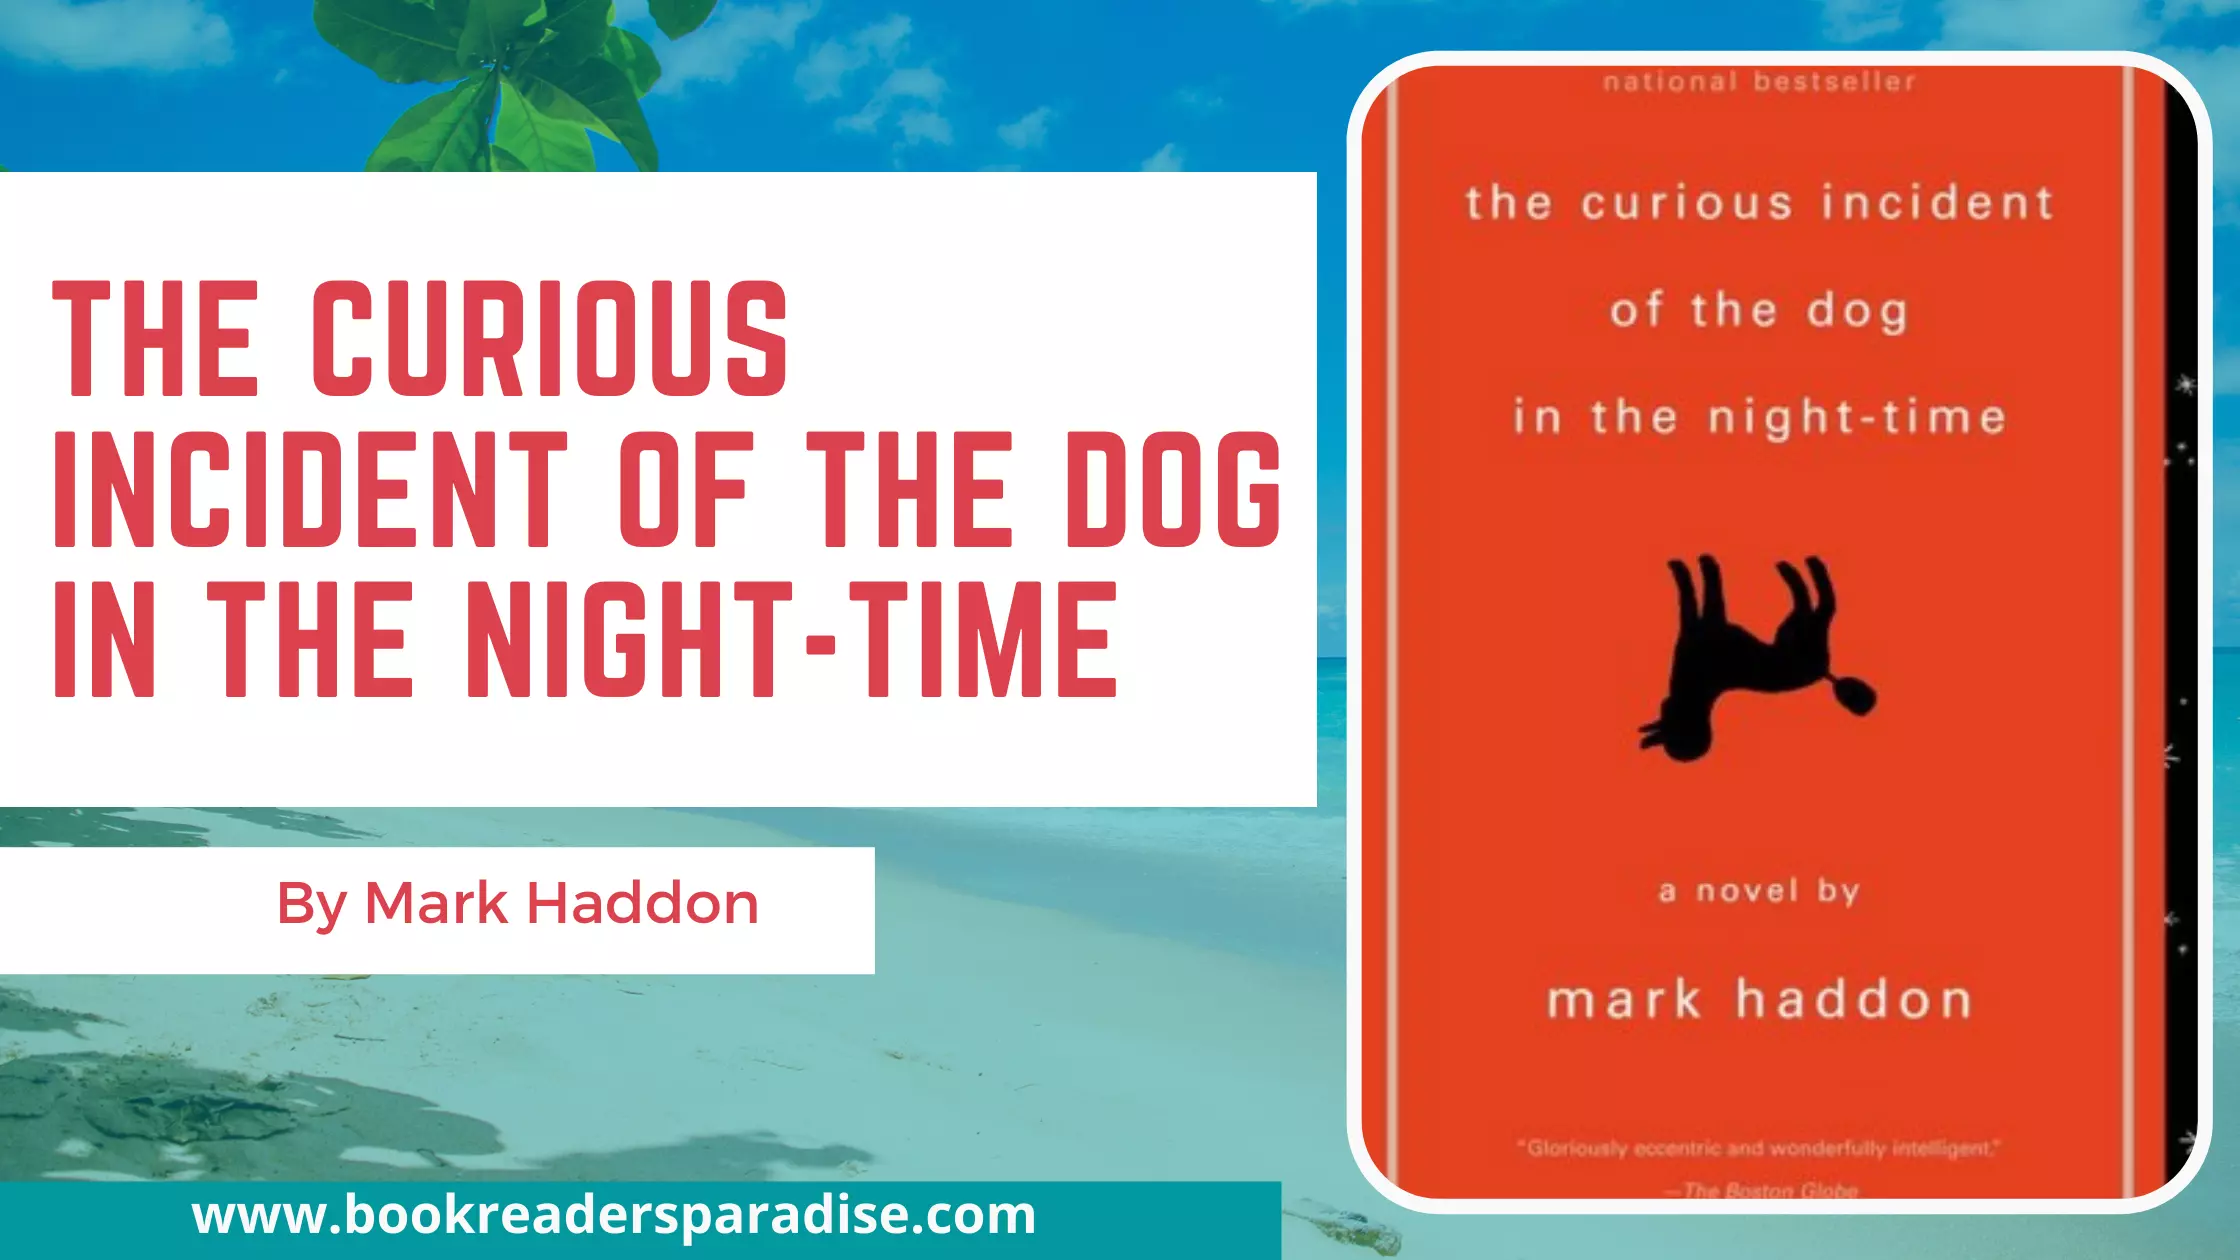 The Curious Incident of the Dog in the Night-time PDF, AudioBook FREE Download